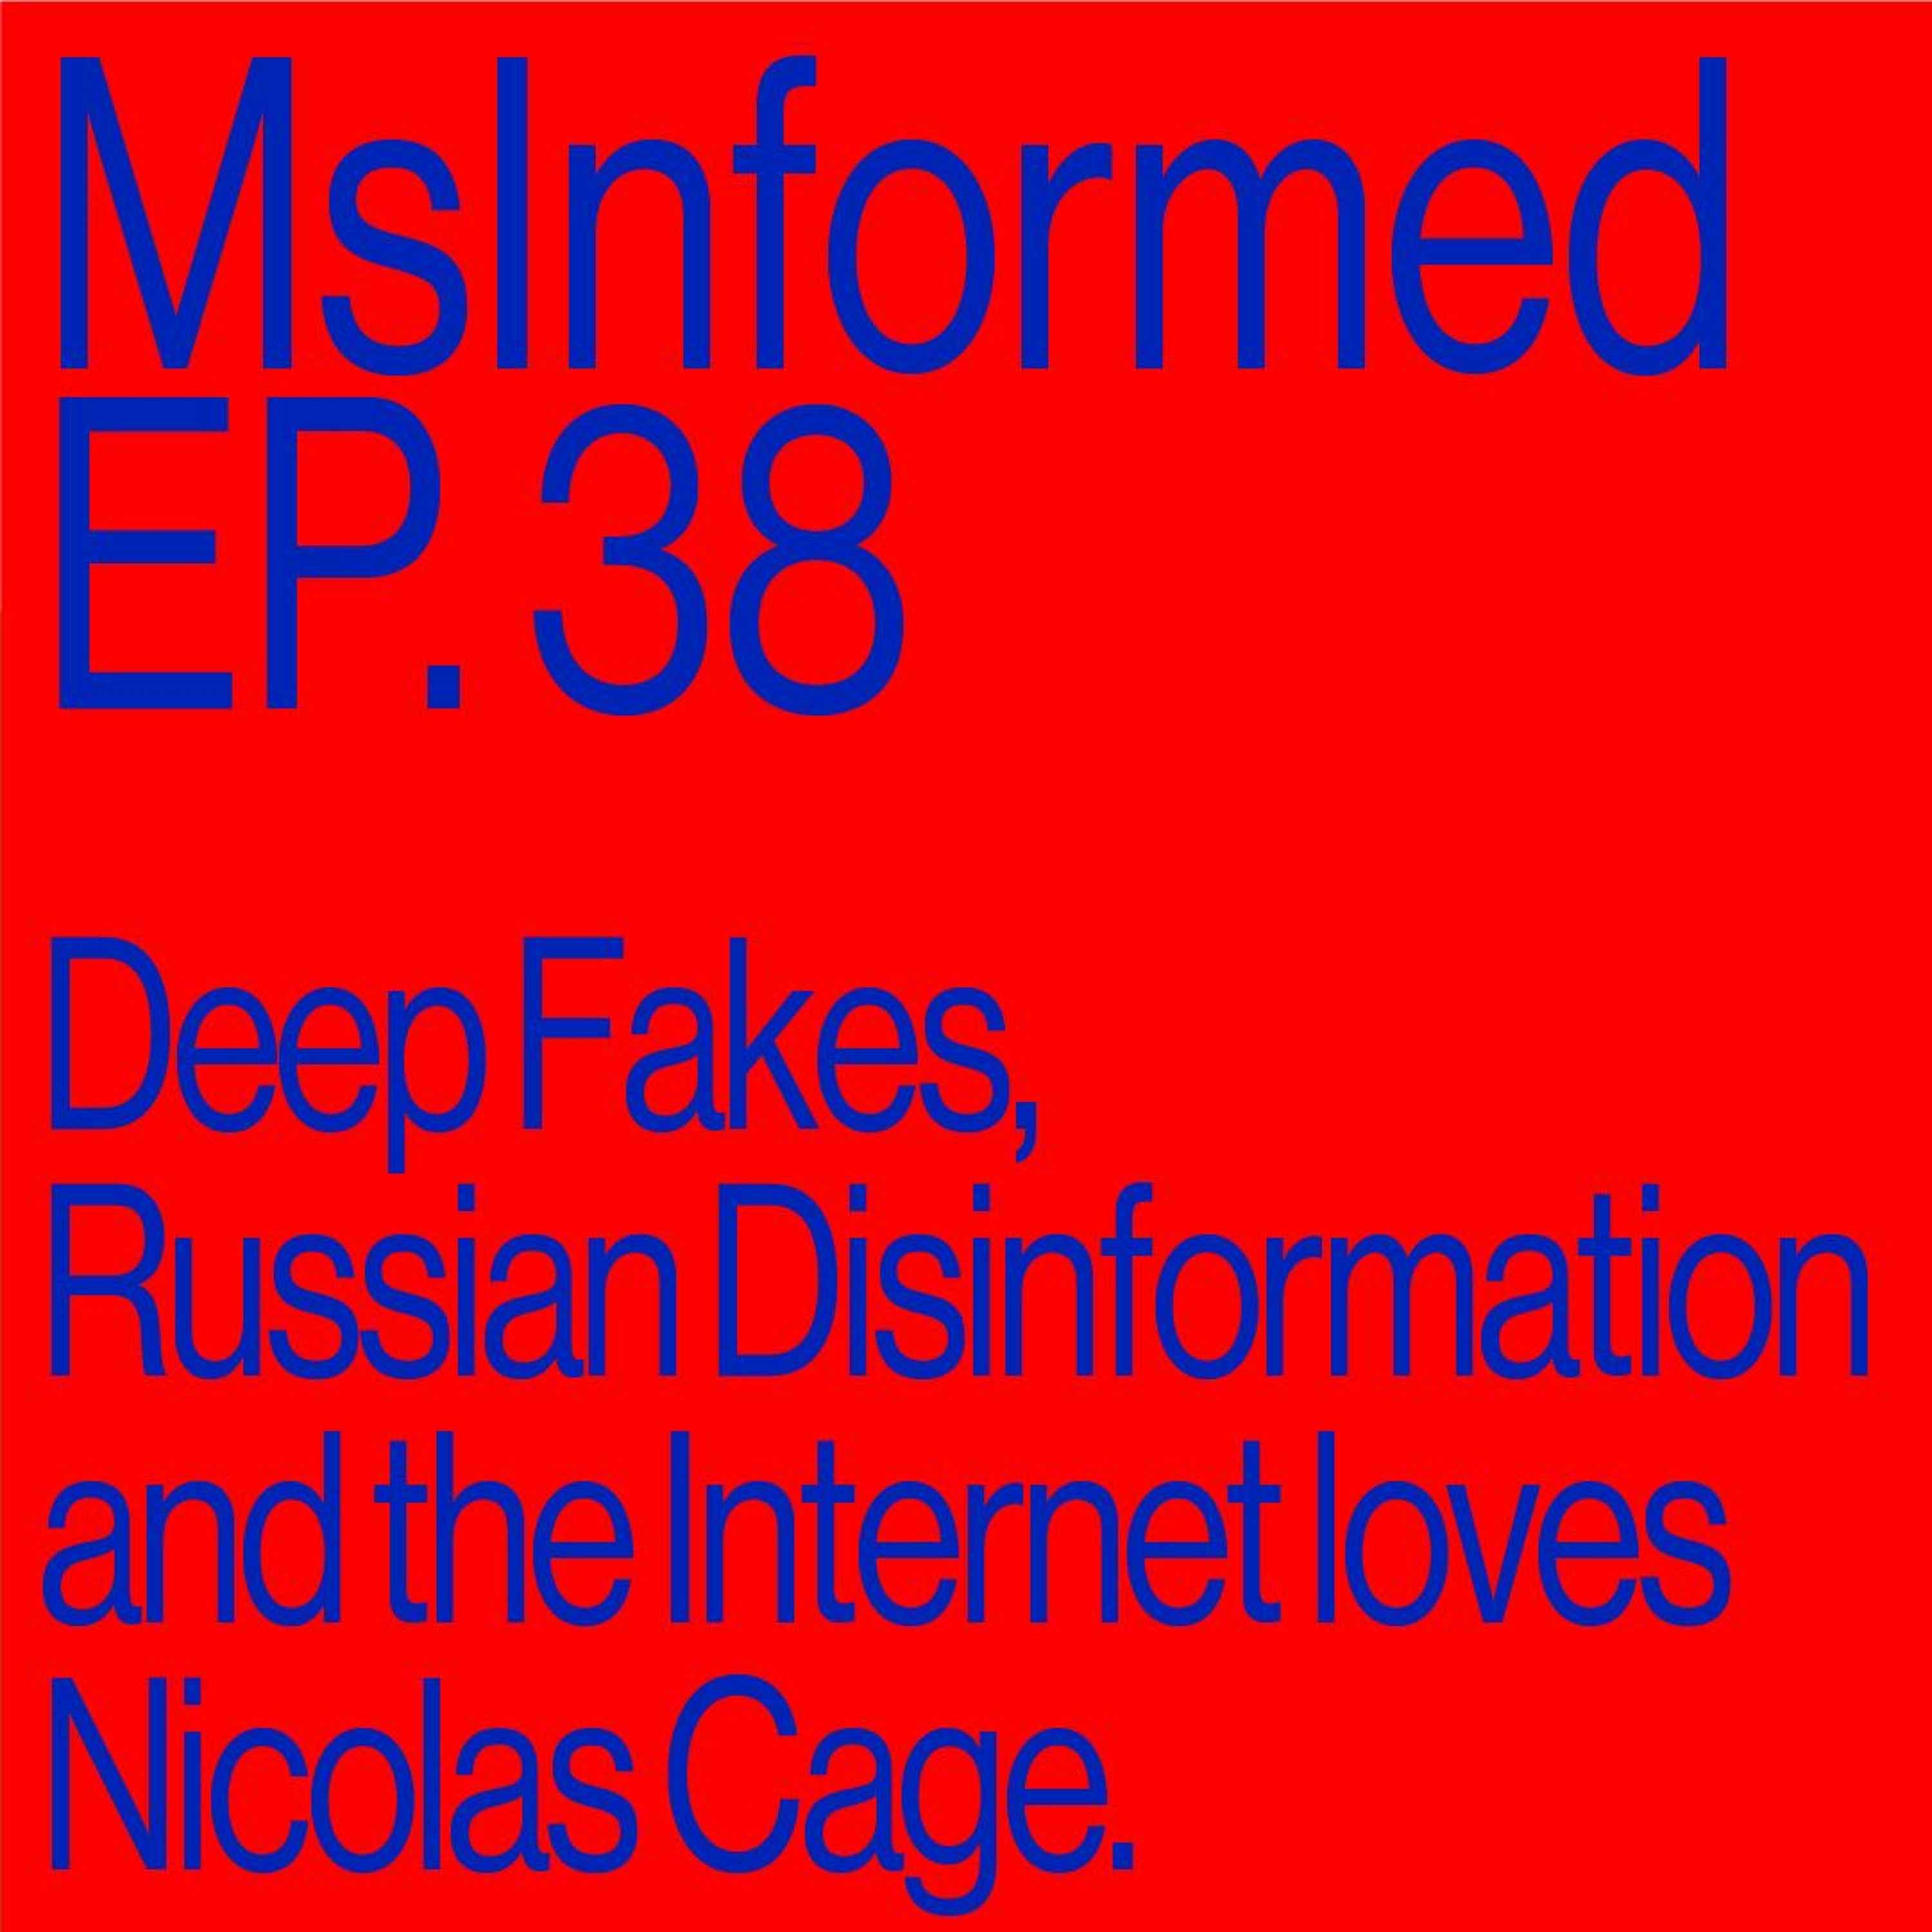 Episode 38: Deep Fakes, Russian Disinformation, And The Internet Loves Nicolas Cage